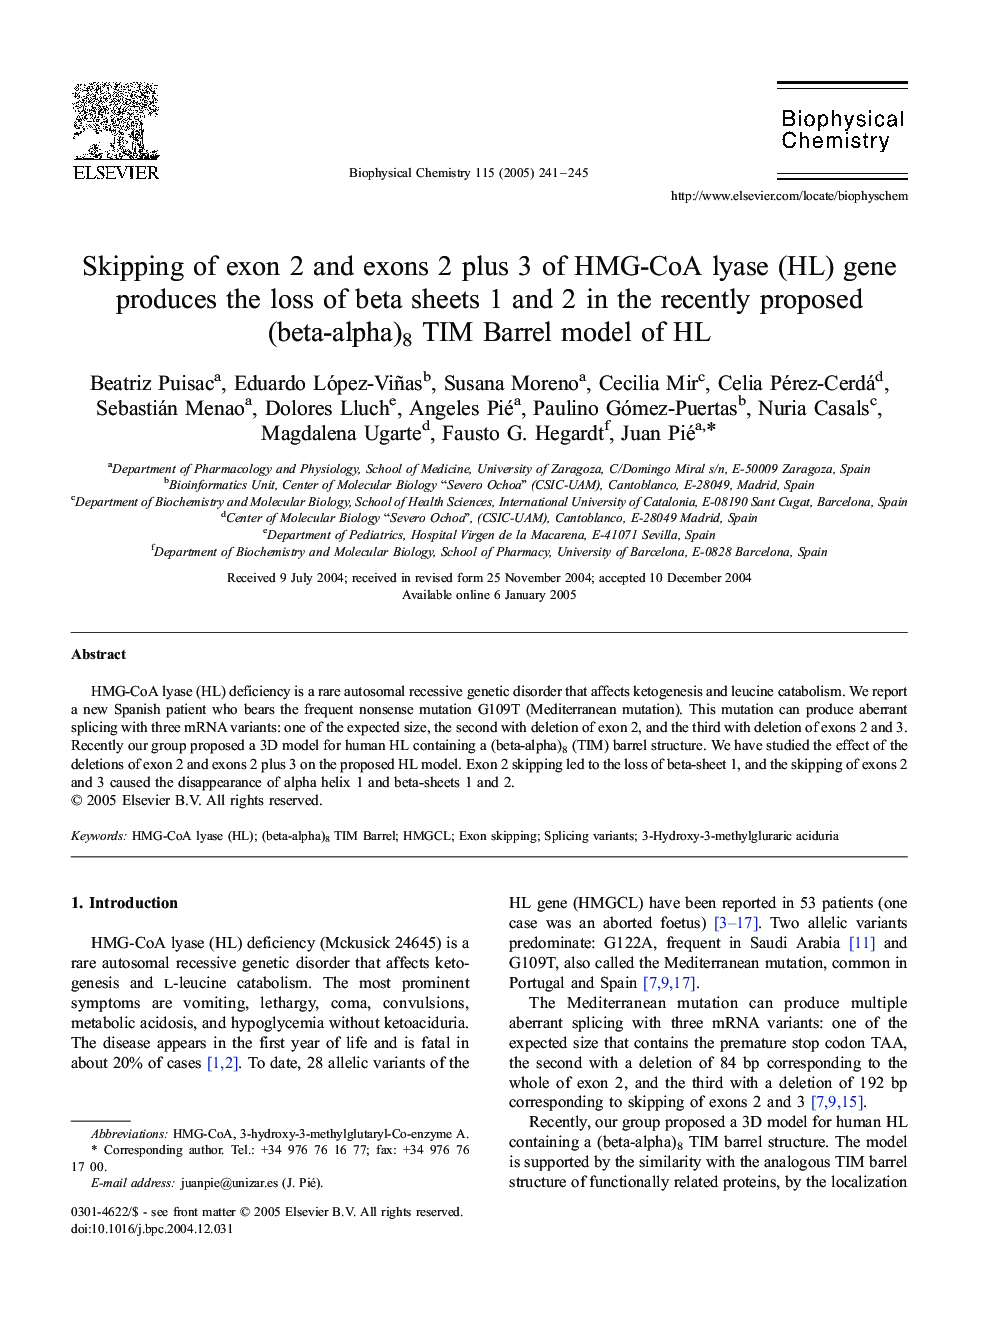 Skipping of exon 2 and exons 2 plus 3 of HMG-CoA lyase (HL) gene produces the loss of beta sheets 1 and 2 in the recently proposed (beta-alpha)8 TIM Barrel model of HL